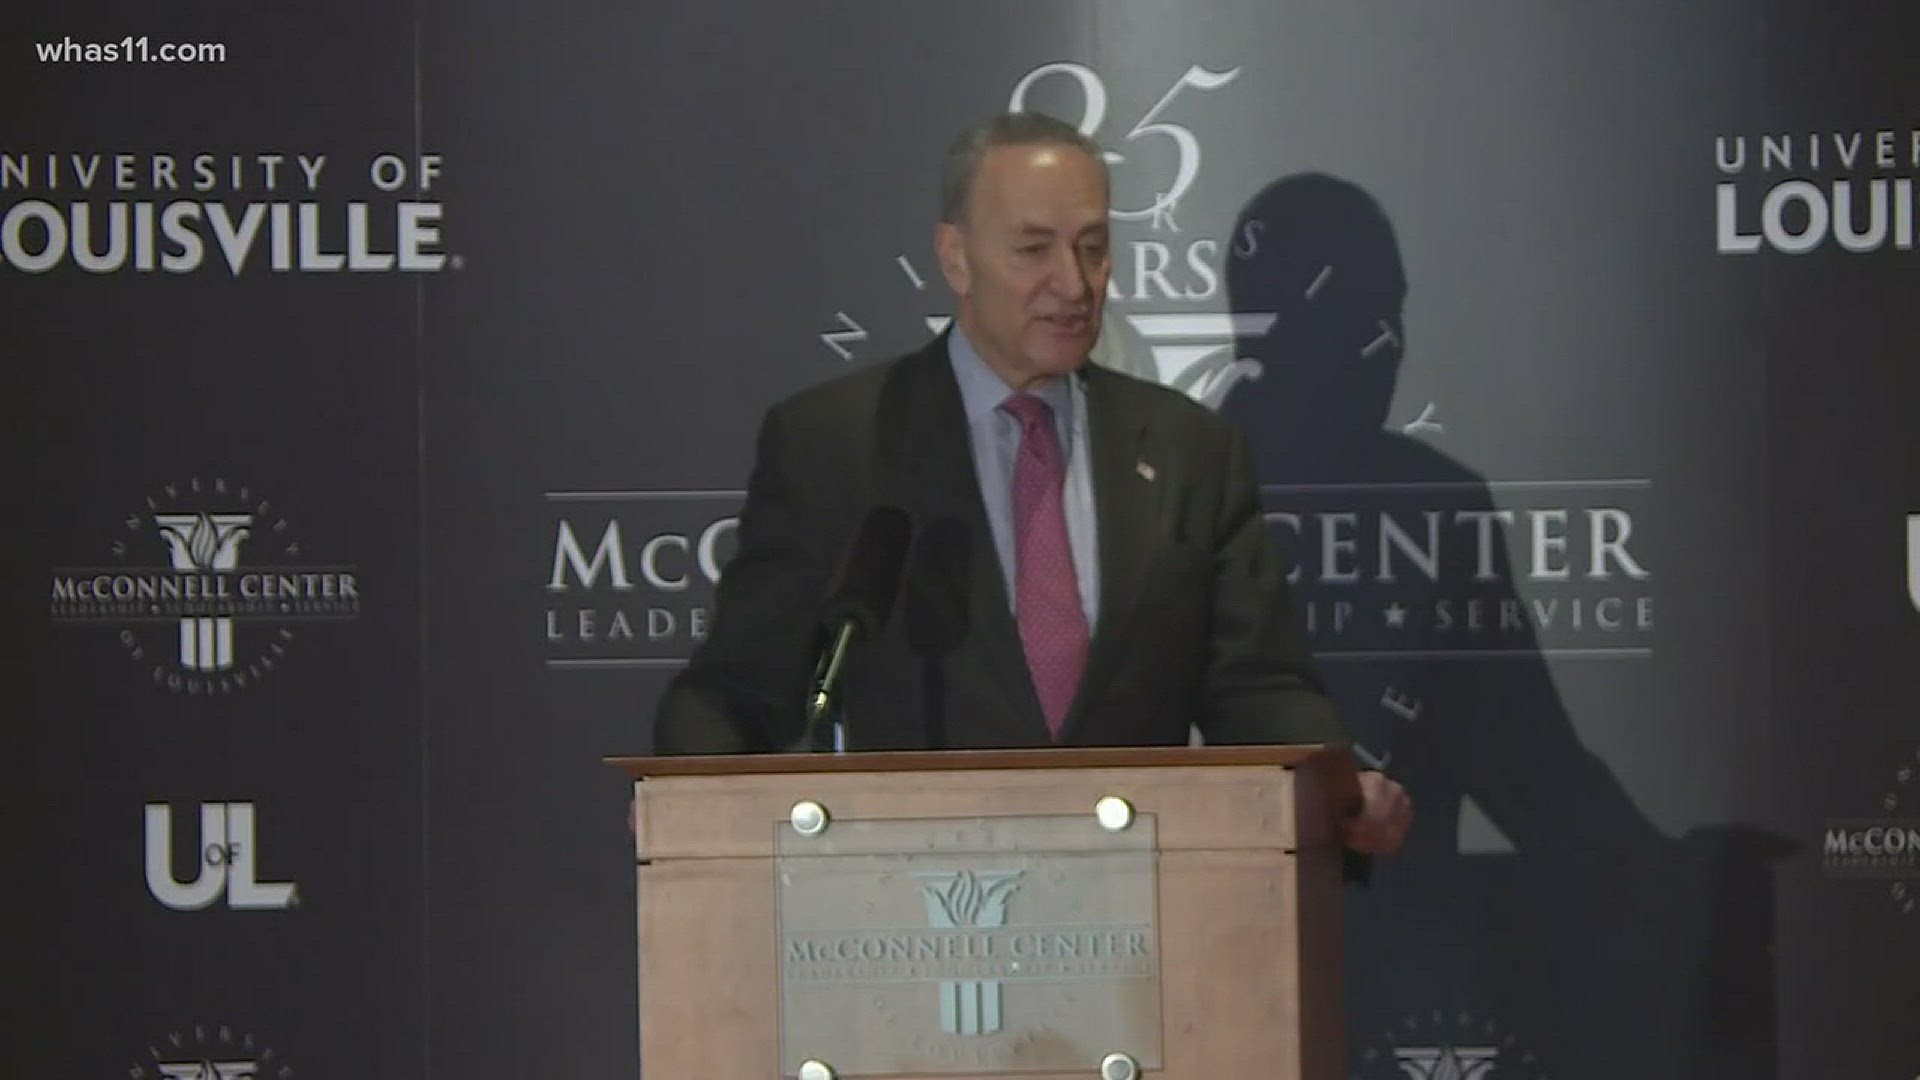 Senate Majority Leader Mitch McConnell welcomed Senate Minority Leader Chuck Schumer to UofL.